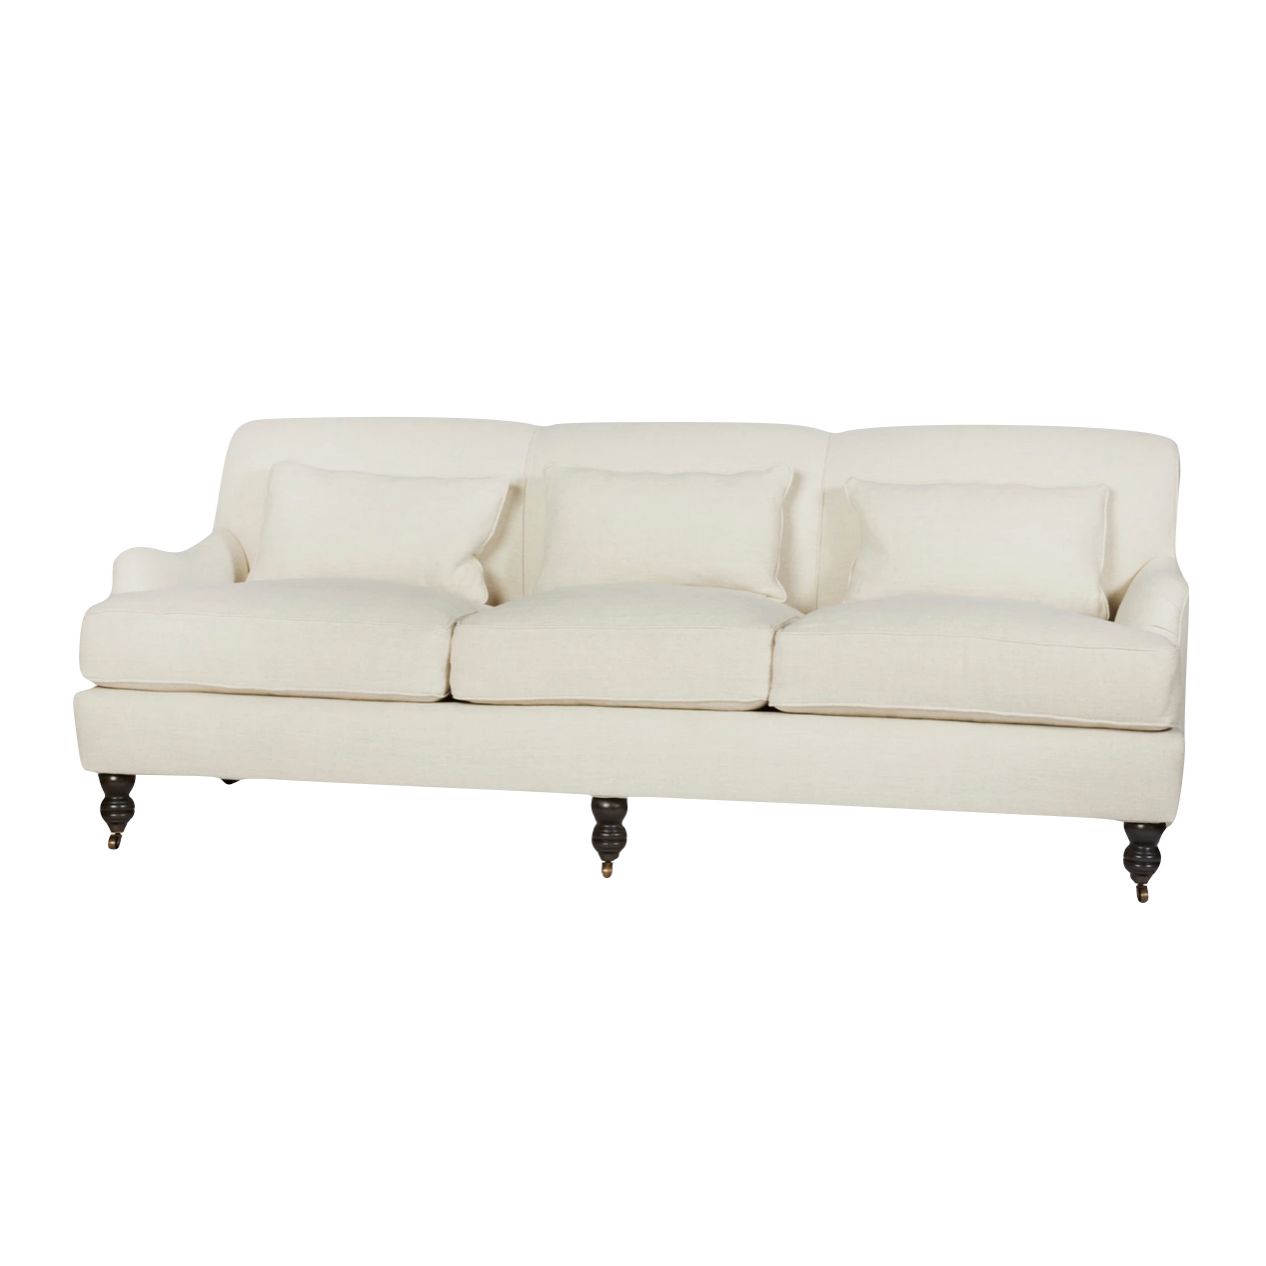 The Beaumont Sofa by Cisco Brothers is a twist on traditional style, with a piping detail and turned front legs with antique casters. Relax into the comfortable lumber pillows for back support with style. Photographed in Brevard Birch.   Overall: 84"w x 38"d x 33"h Sitting Space: 74"w x 24"d Seat Height: 19"h Arm Height: 23"h